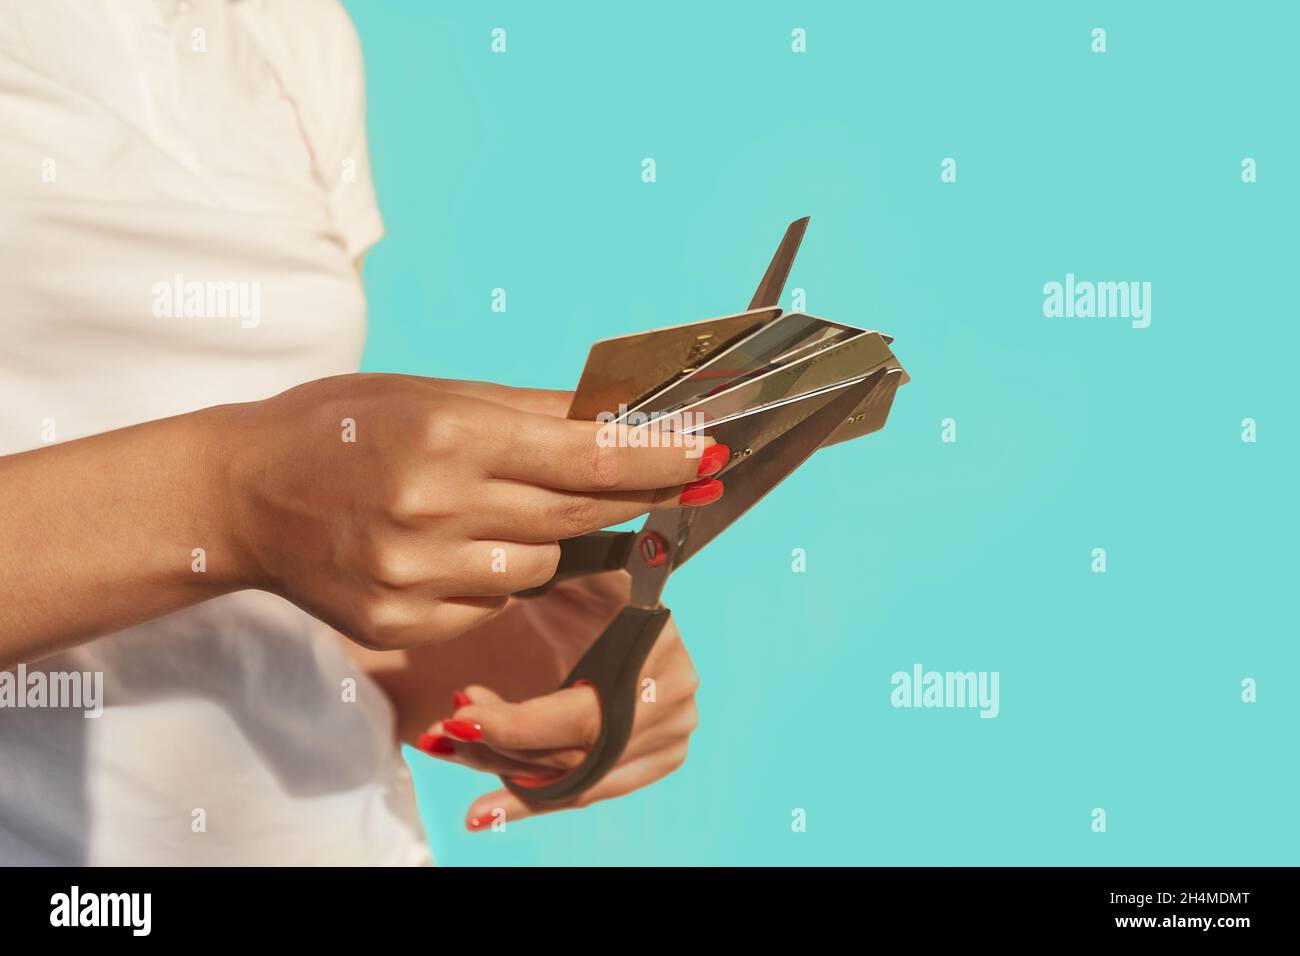 Female hands are cutting a stack of credit cards with scissors Stock Photo